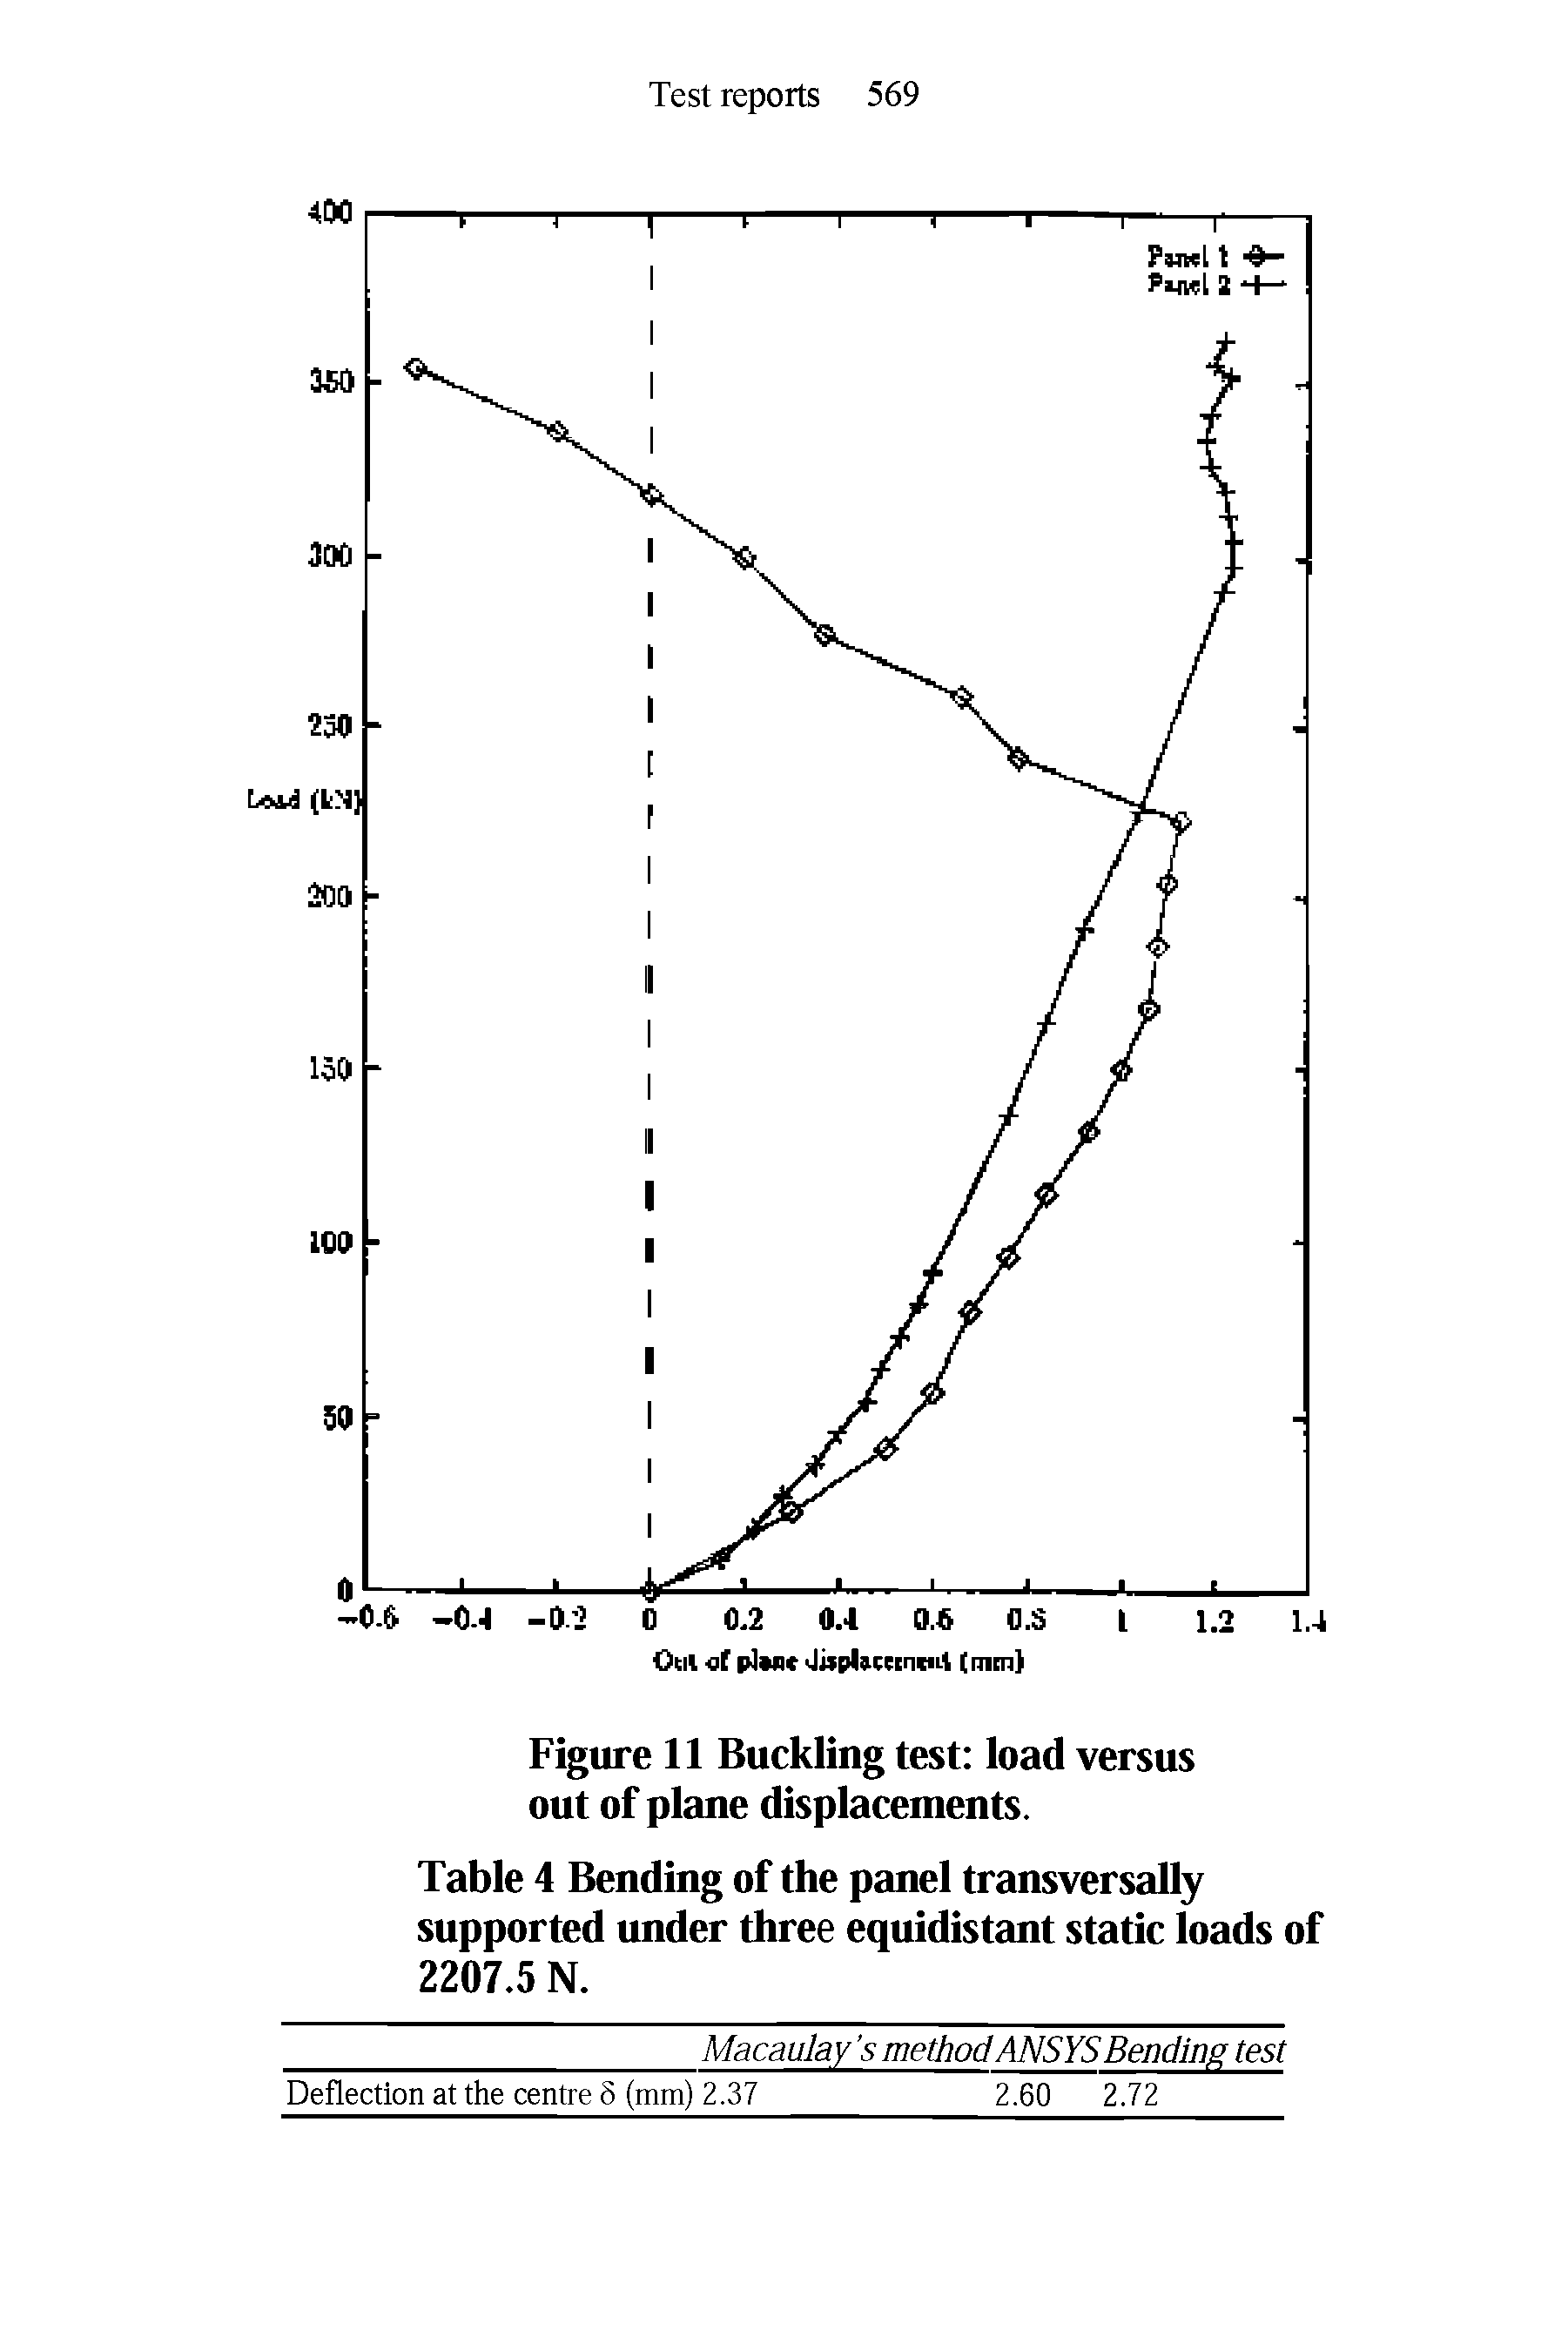 Figure 11 Buckling test load versus out of plane displacements.